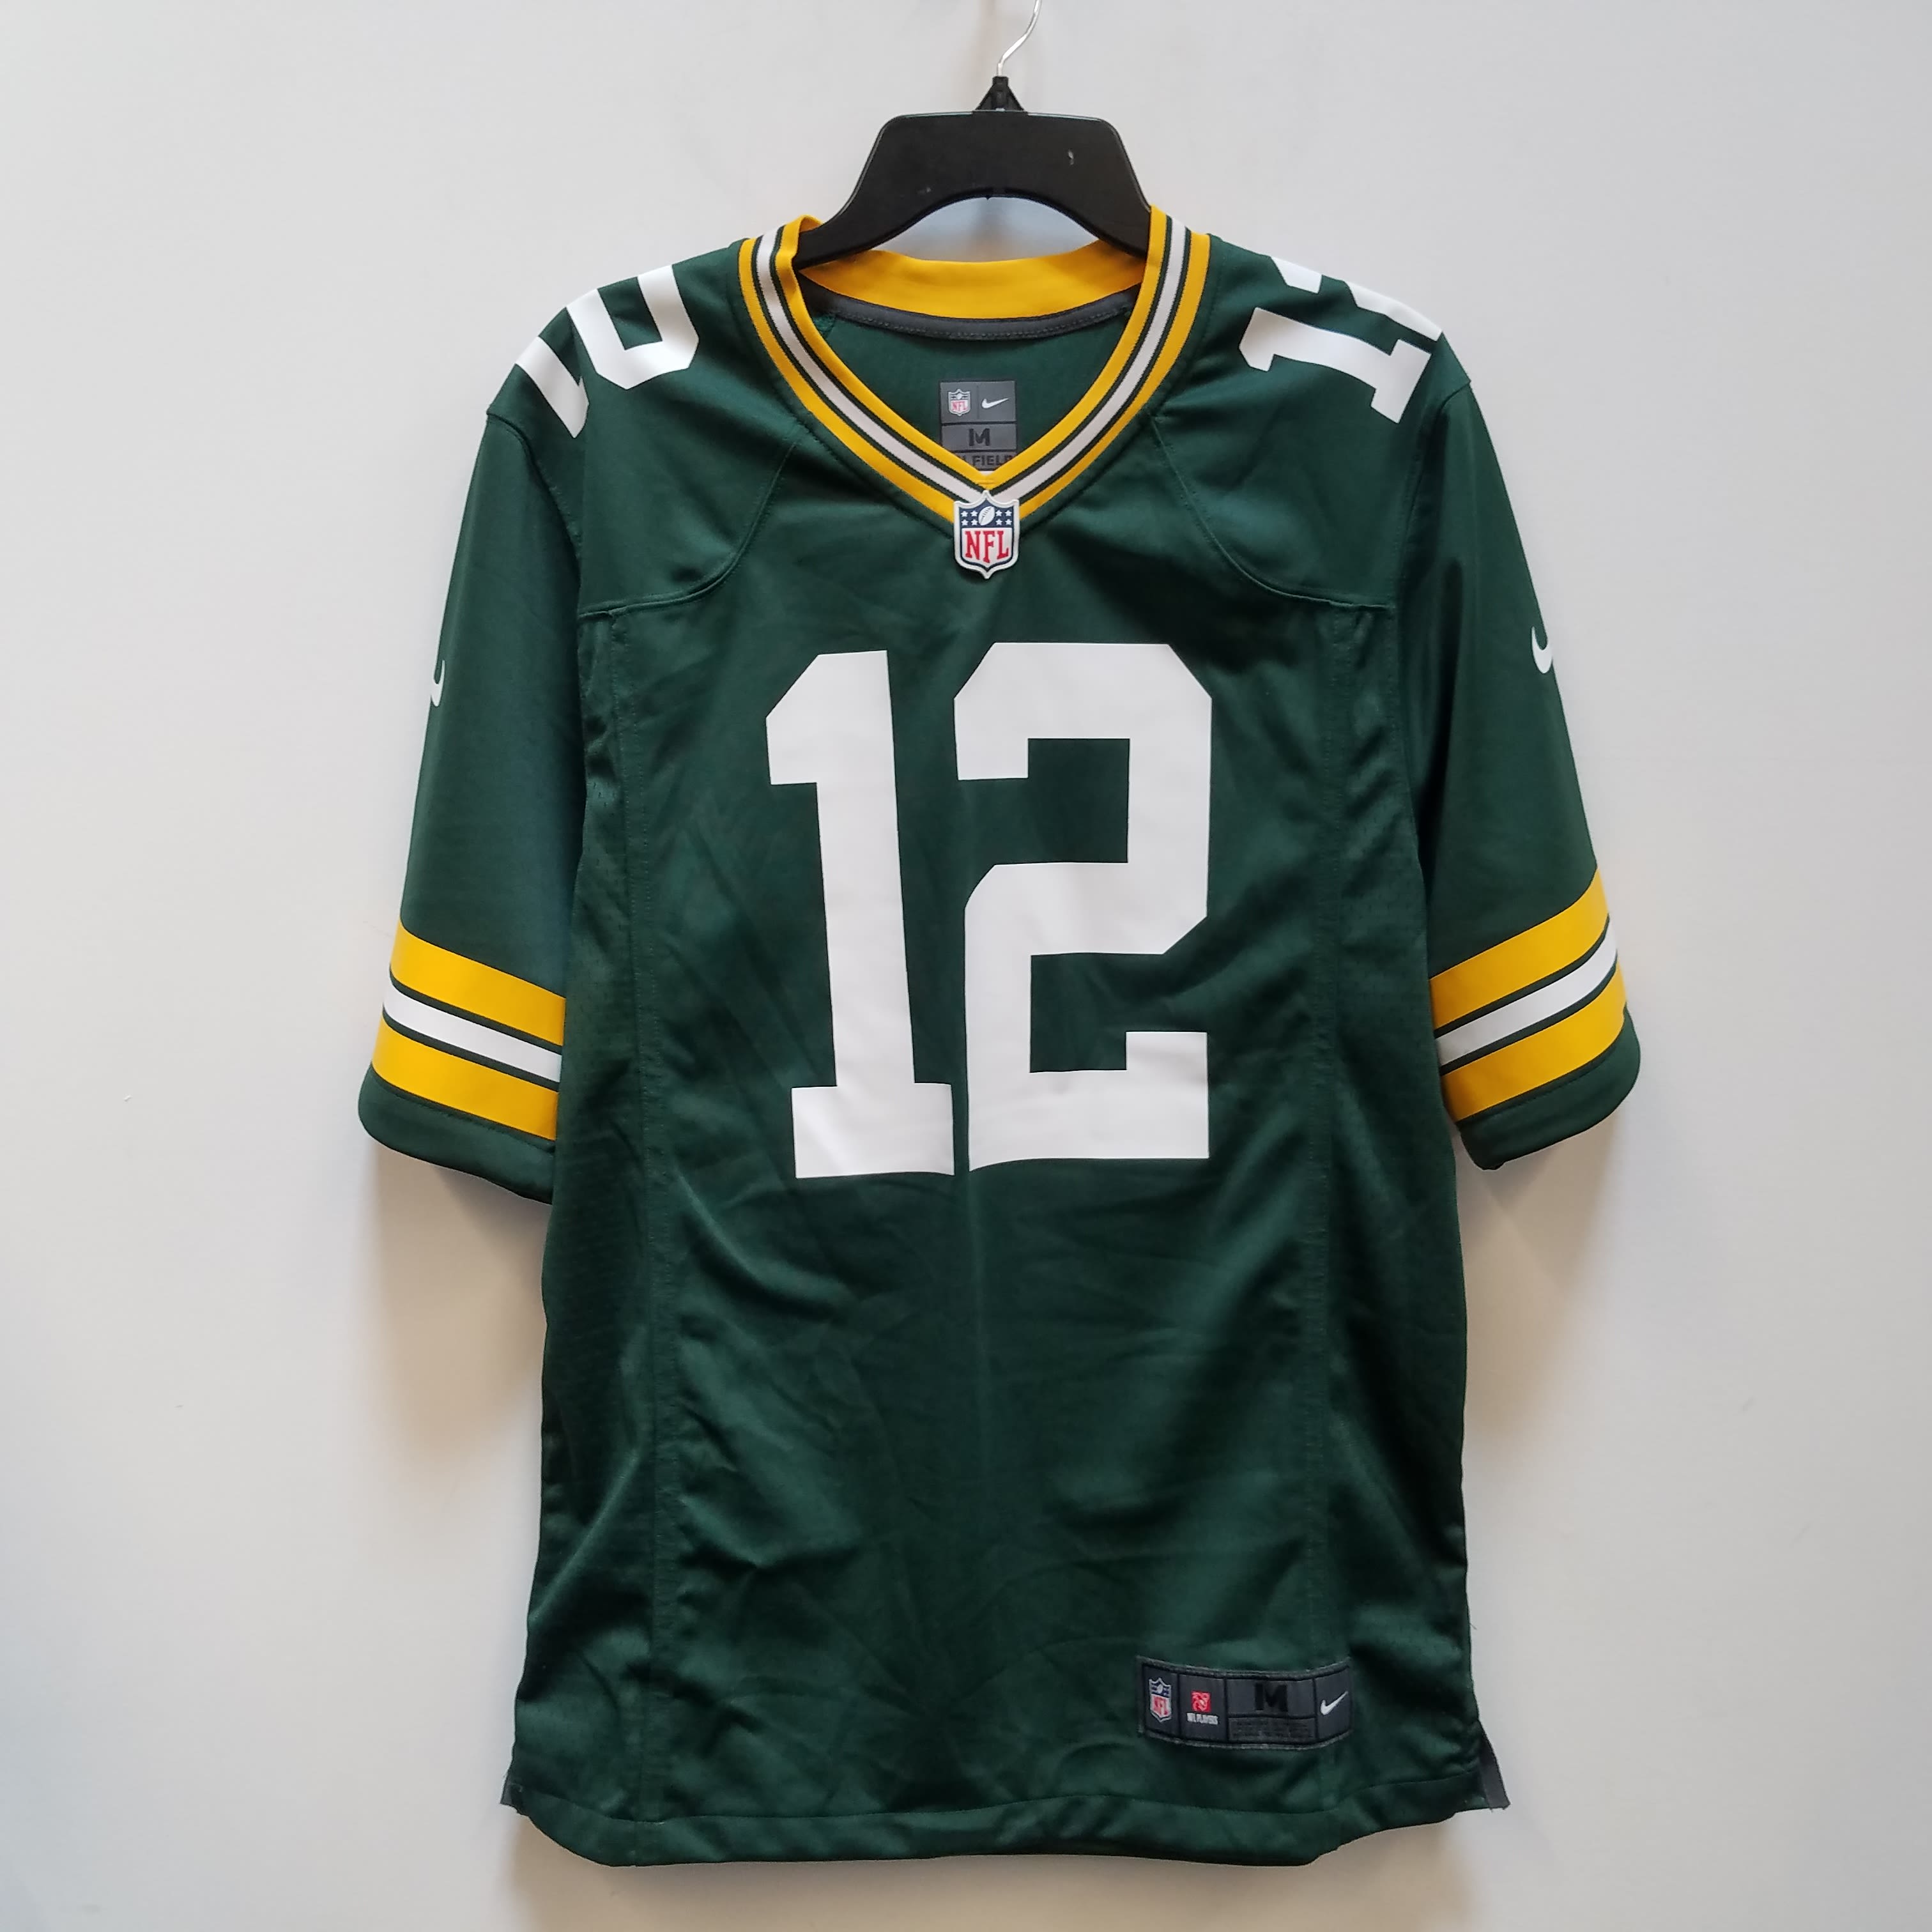 Nike Womens Green Bay Packers Throwback Jersey Size Large Aaron